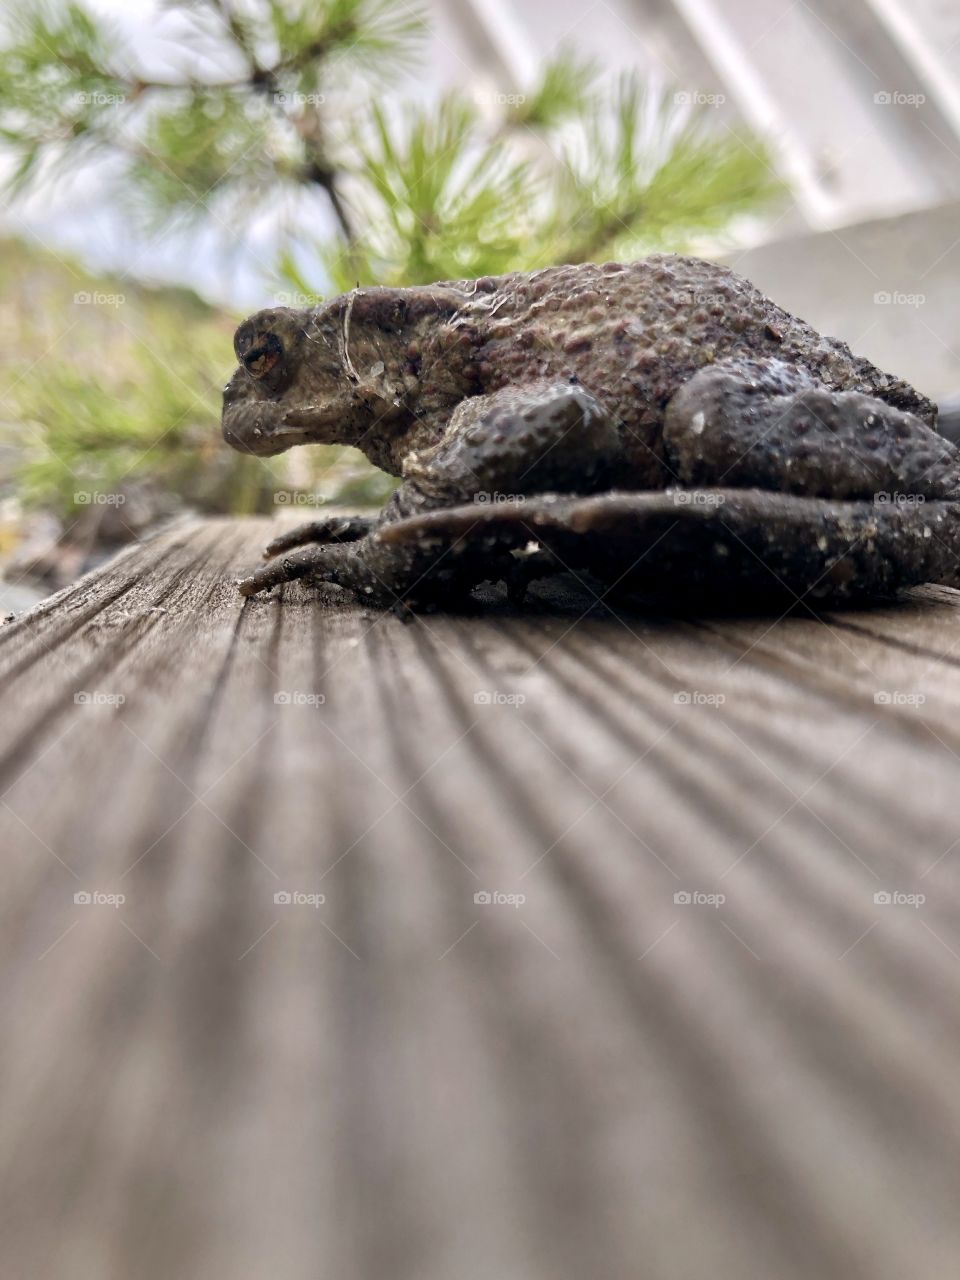 Toad view